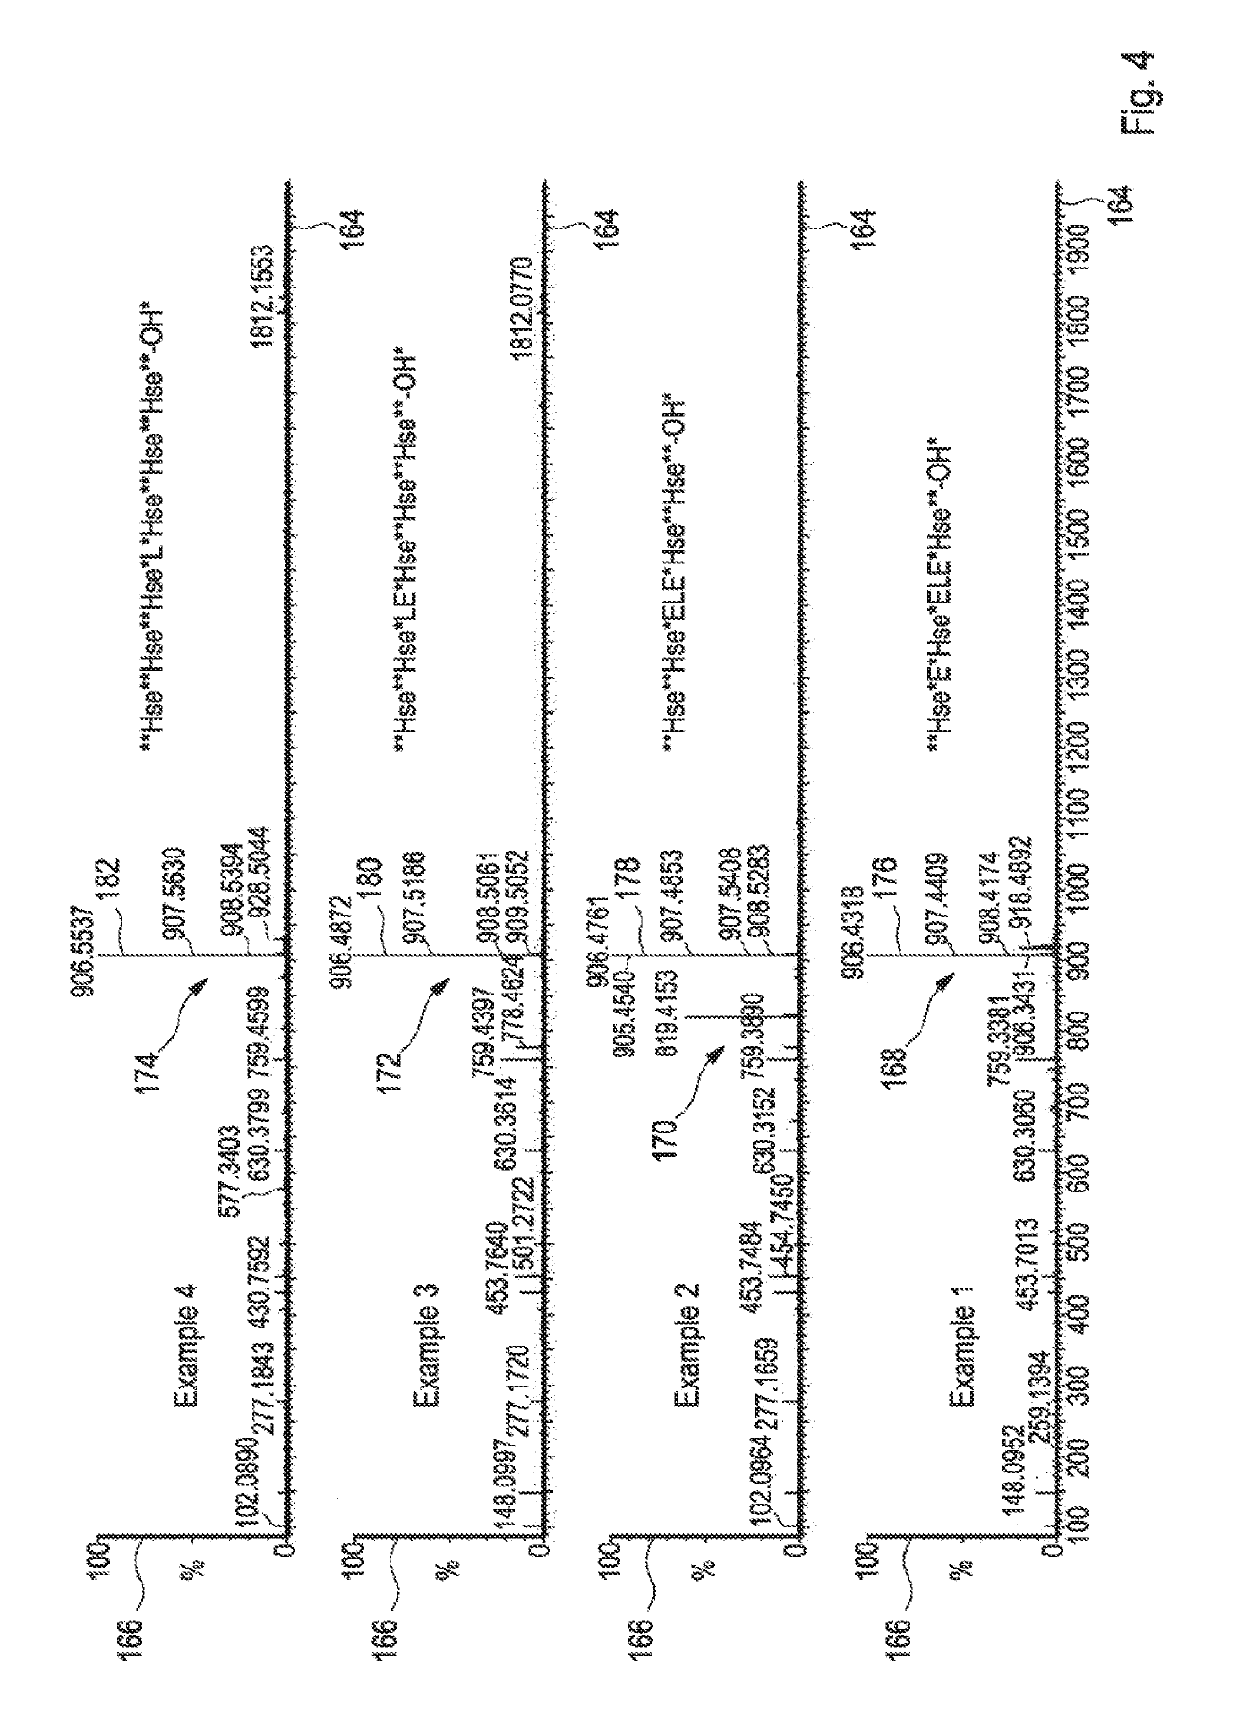 Method for tracking a sample idenitity during a process in an analysis system